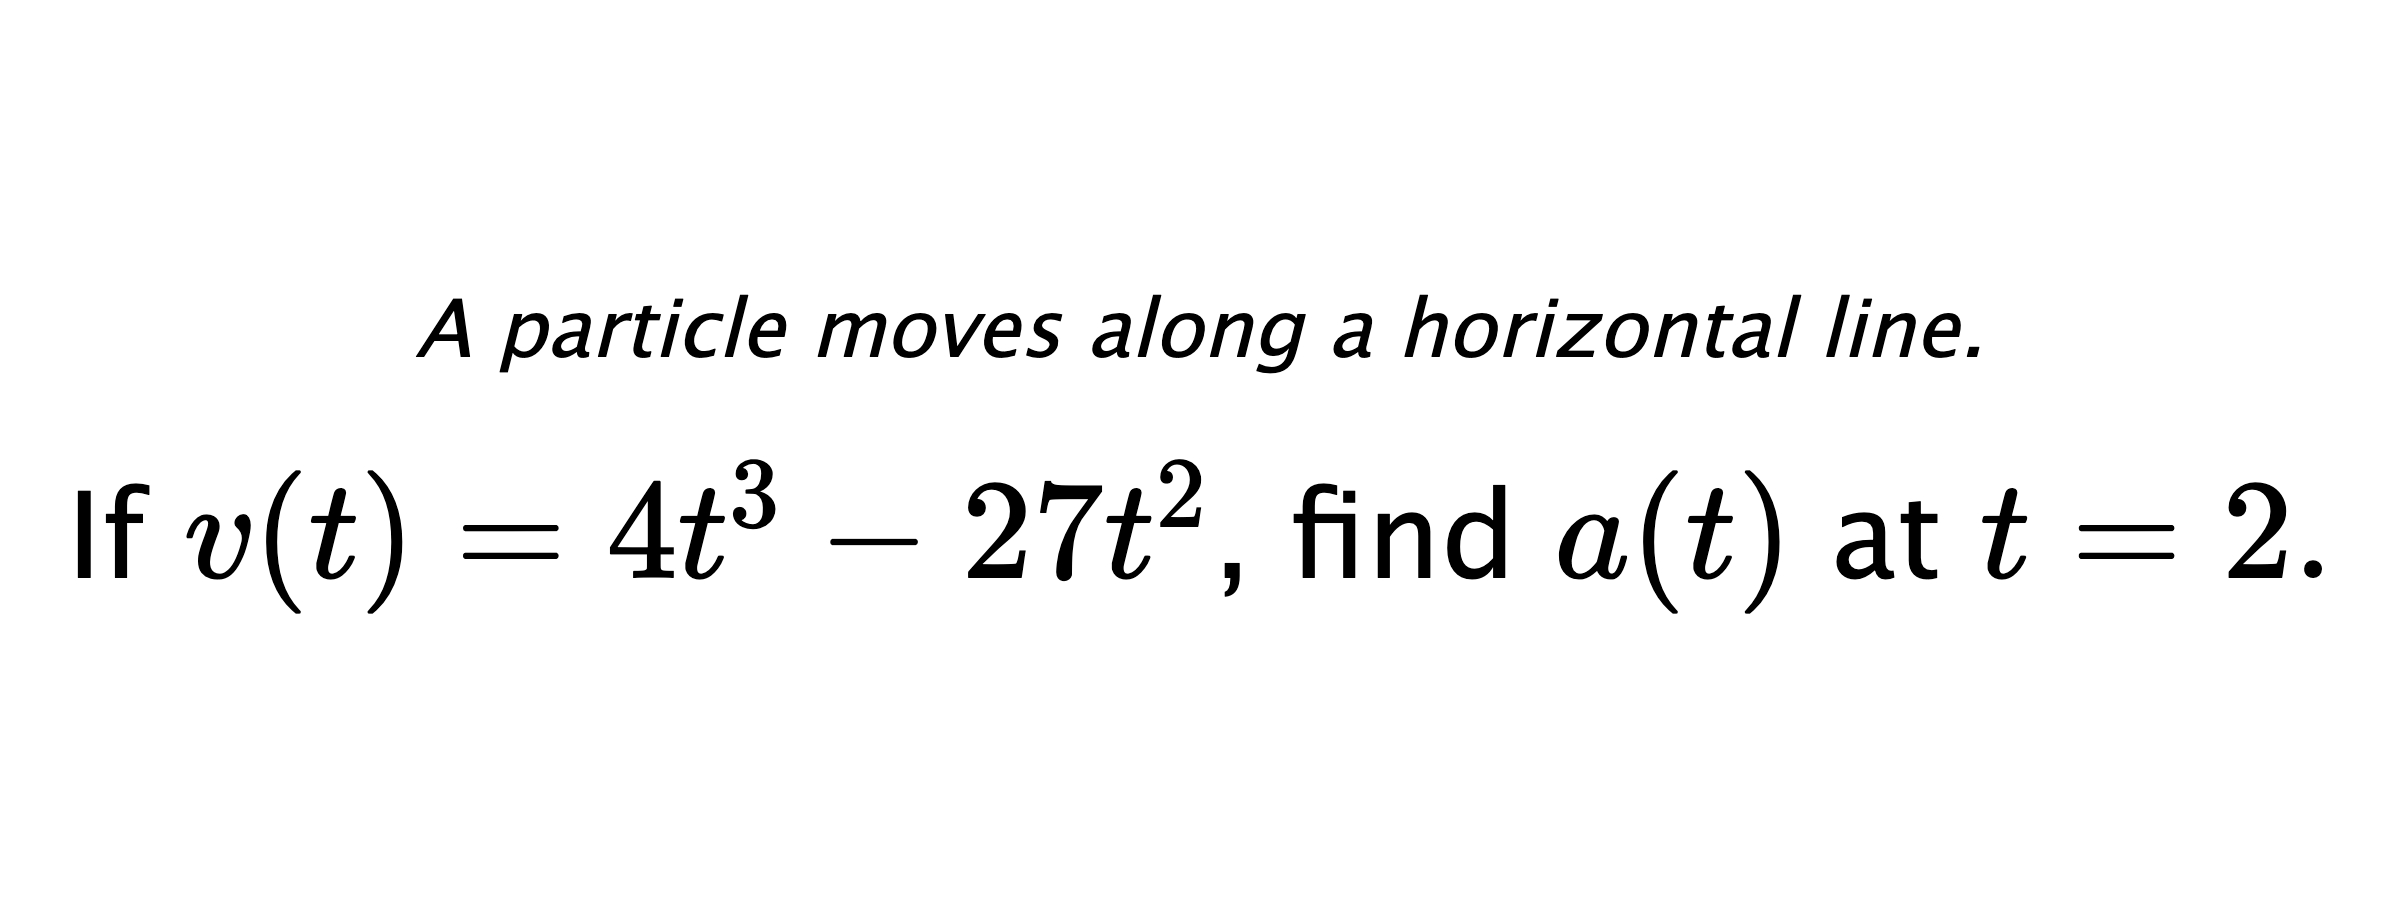 A particle moves along a horizontal line. If $ v(t)=4t^3-27t^2 $, find $ a(t) $ at $ t=2 .$